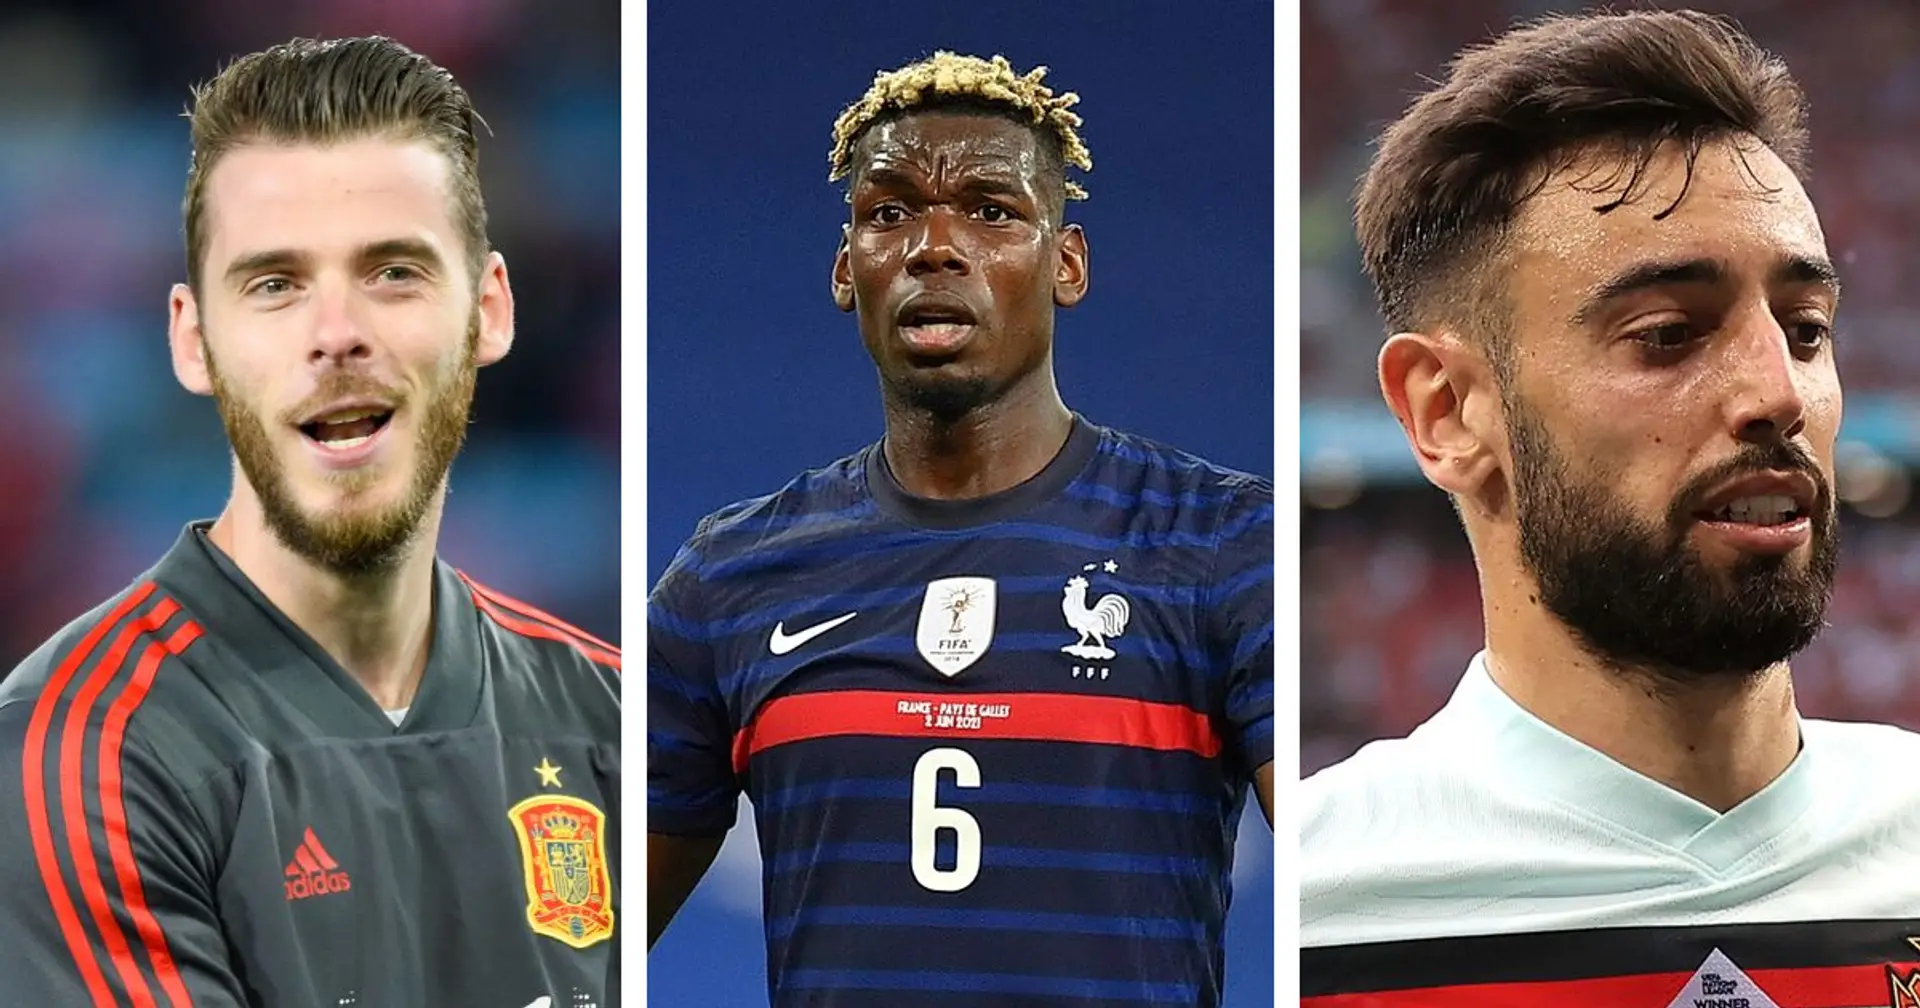 De Gea, Pogba, Bruno & more: Shirt numbers of Man United players at Euro 2020 compared 